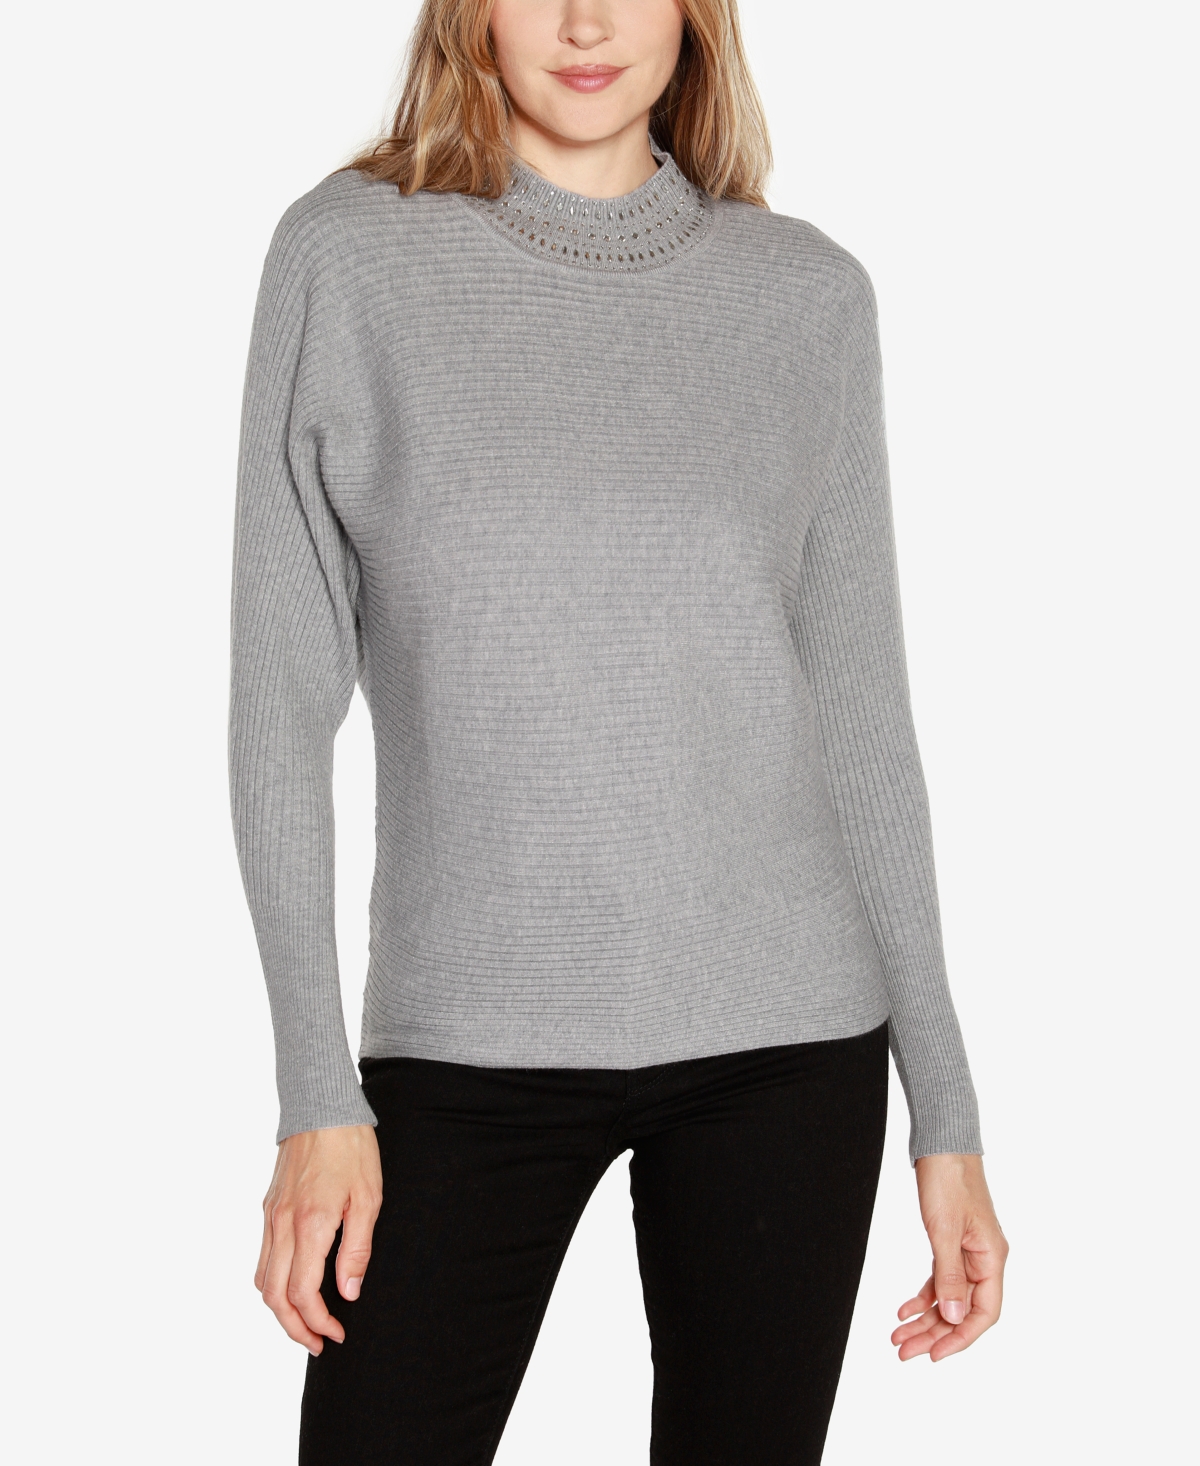 BELLDINI WOMEN'S EMBELLISHED NECK RIBBED DOLMAN SWEATER